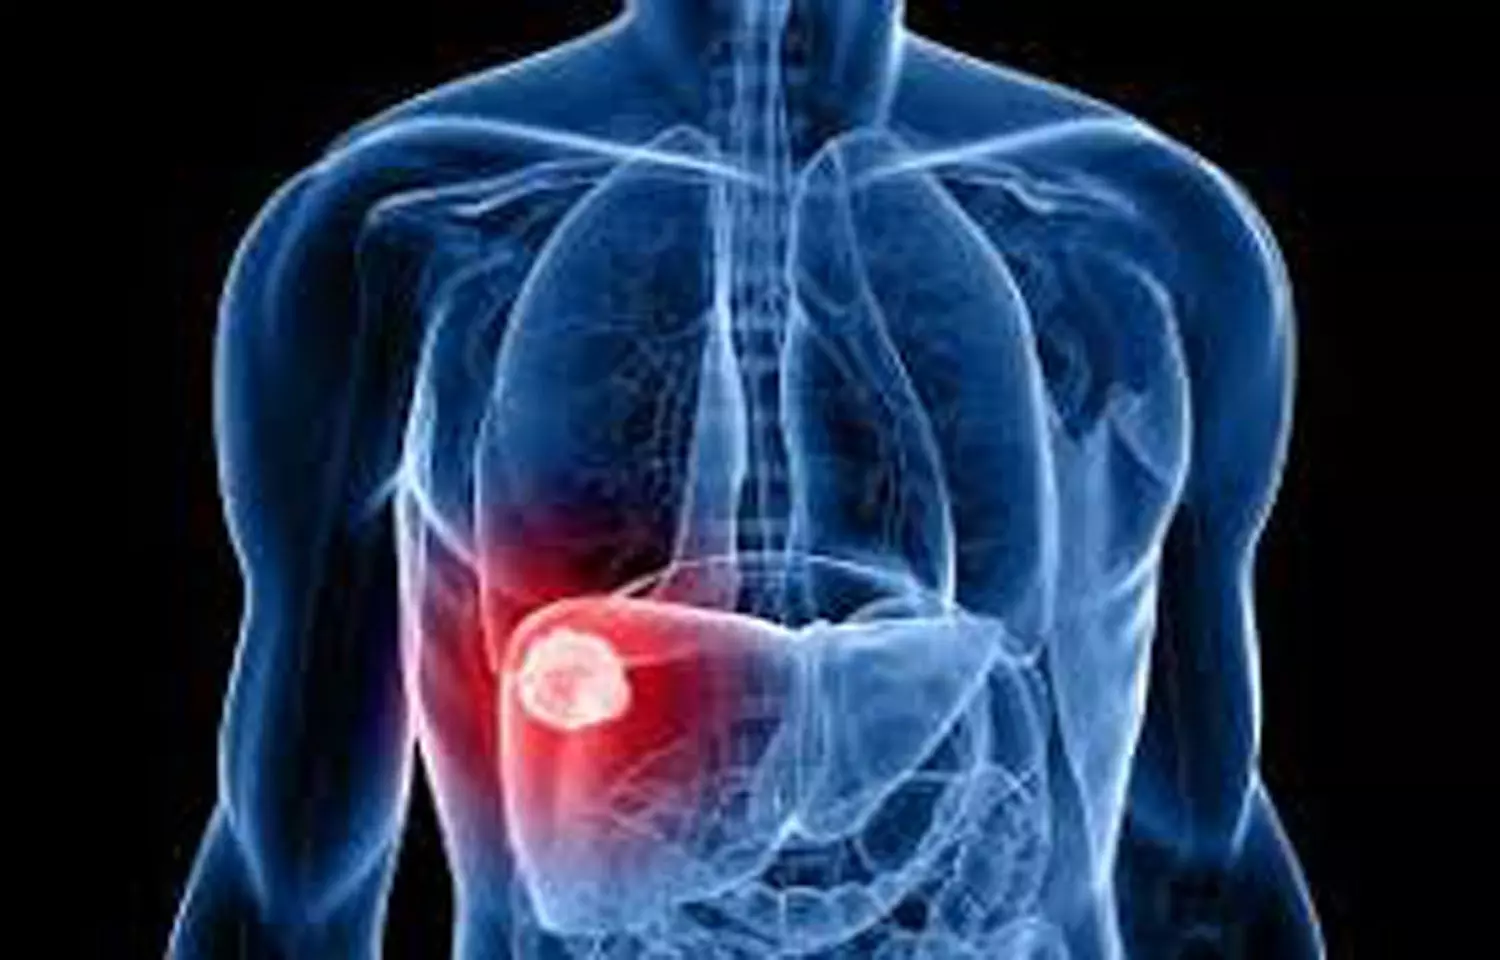 Radio-wave therapy safe and improves survival for liver cancer patients: Study